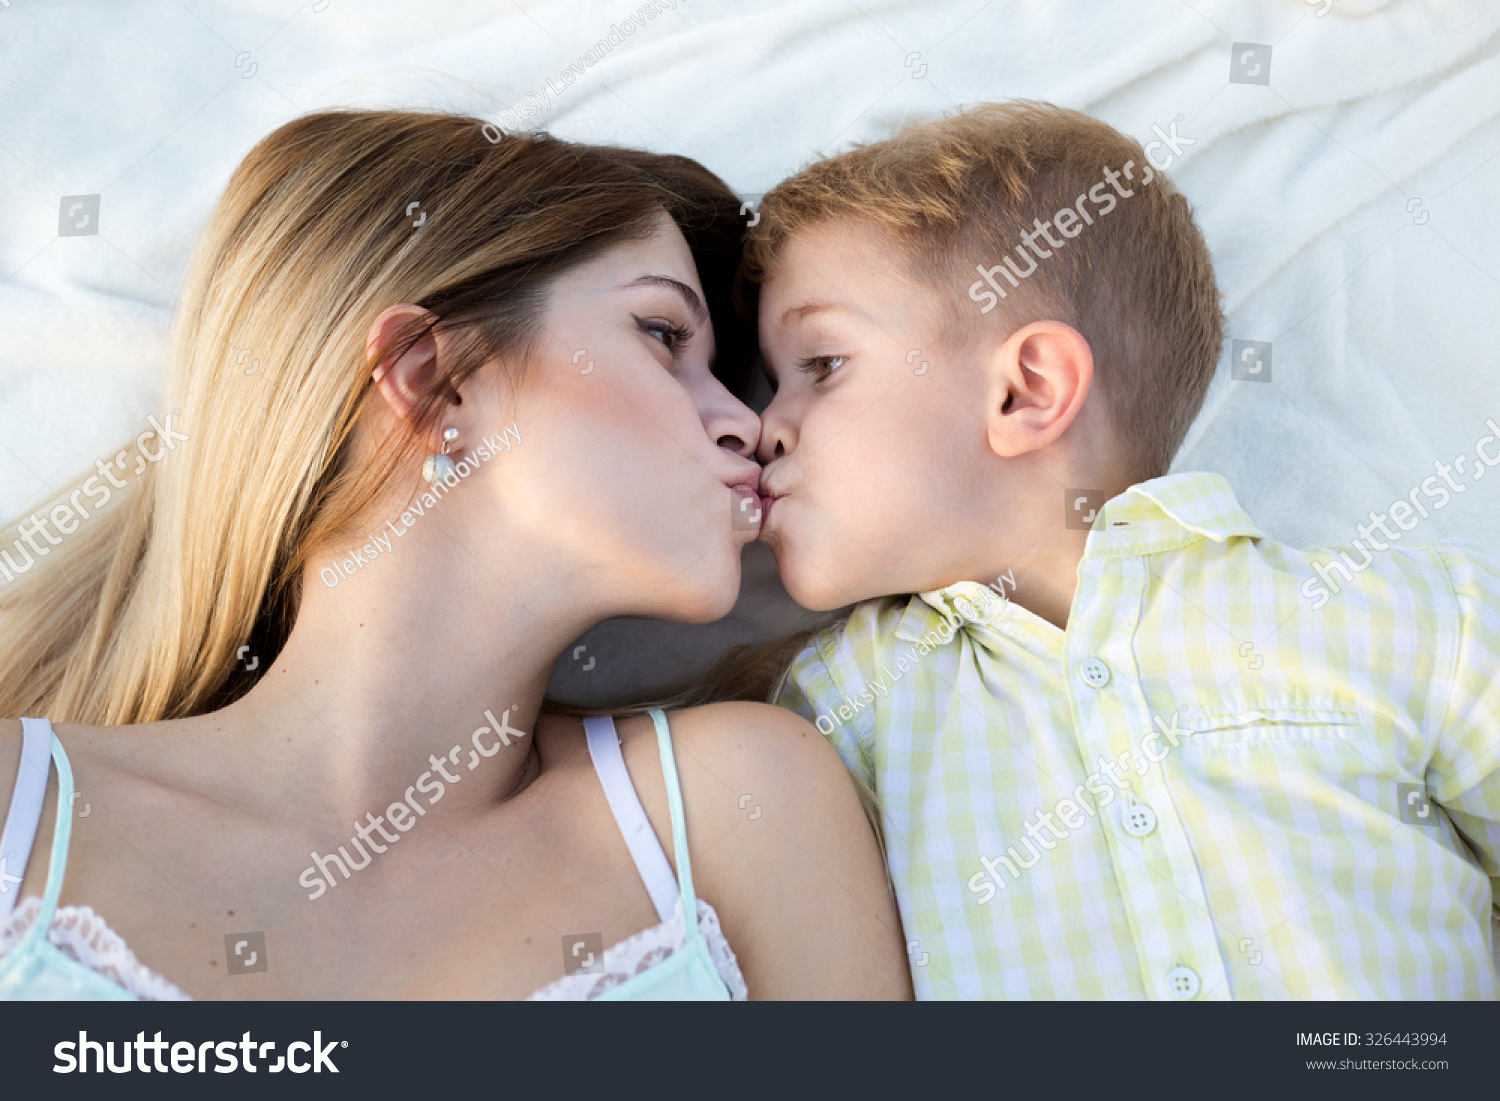 dominique granger add mother son making out photo